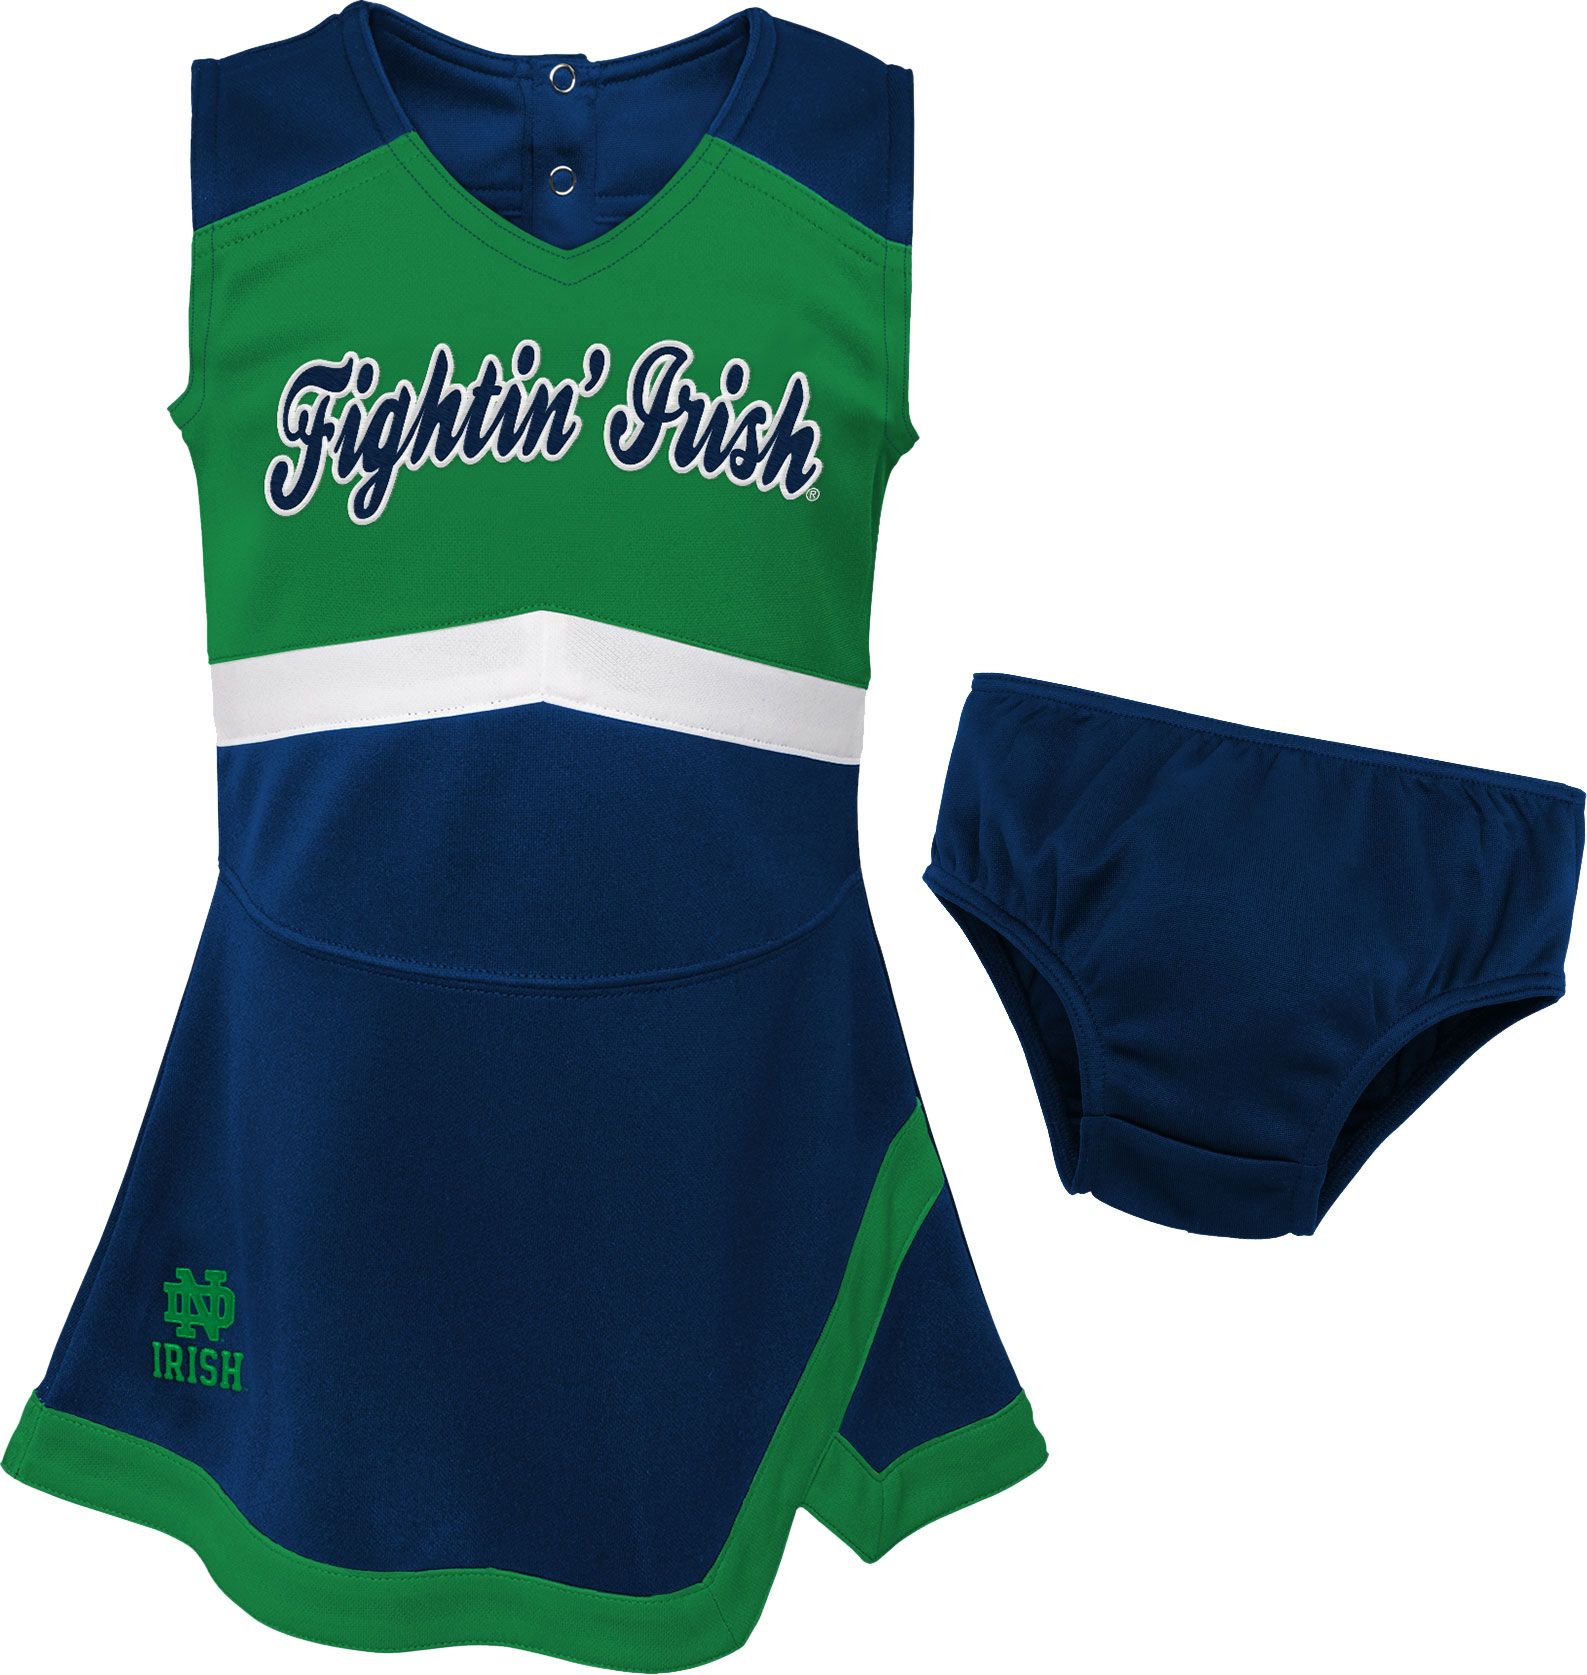 notre dame baby cheerleader outfit